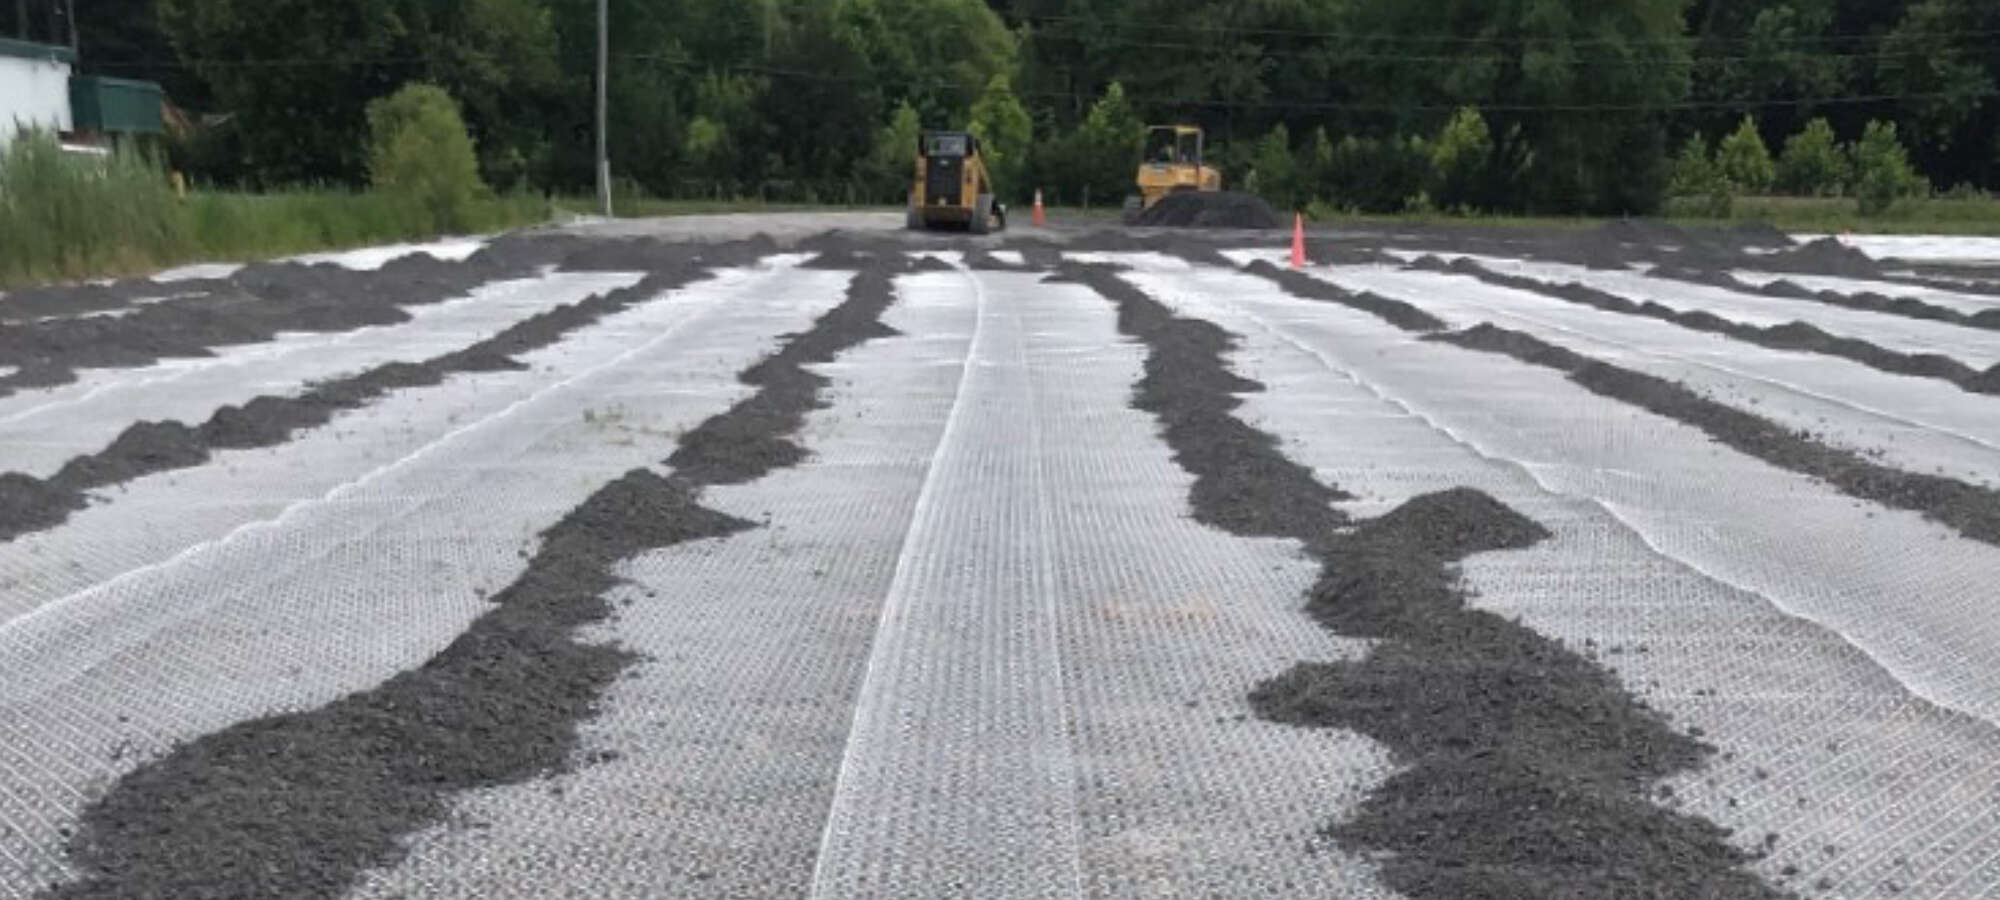 InterAx Geogrid installed at a container yard for subgrade stabilization.